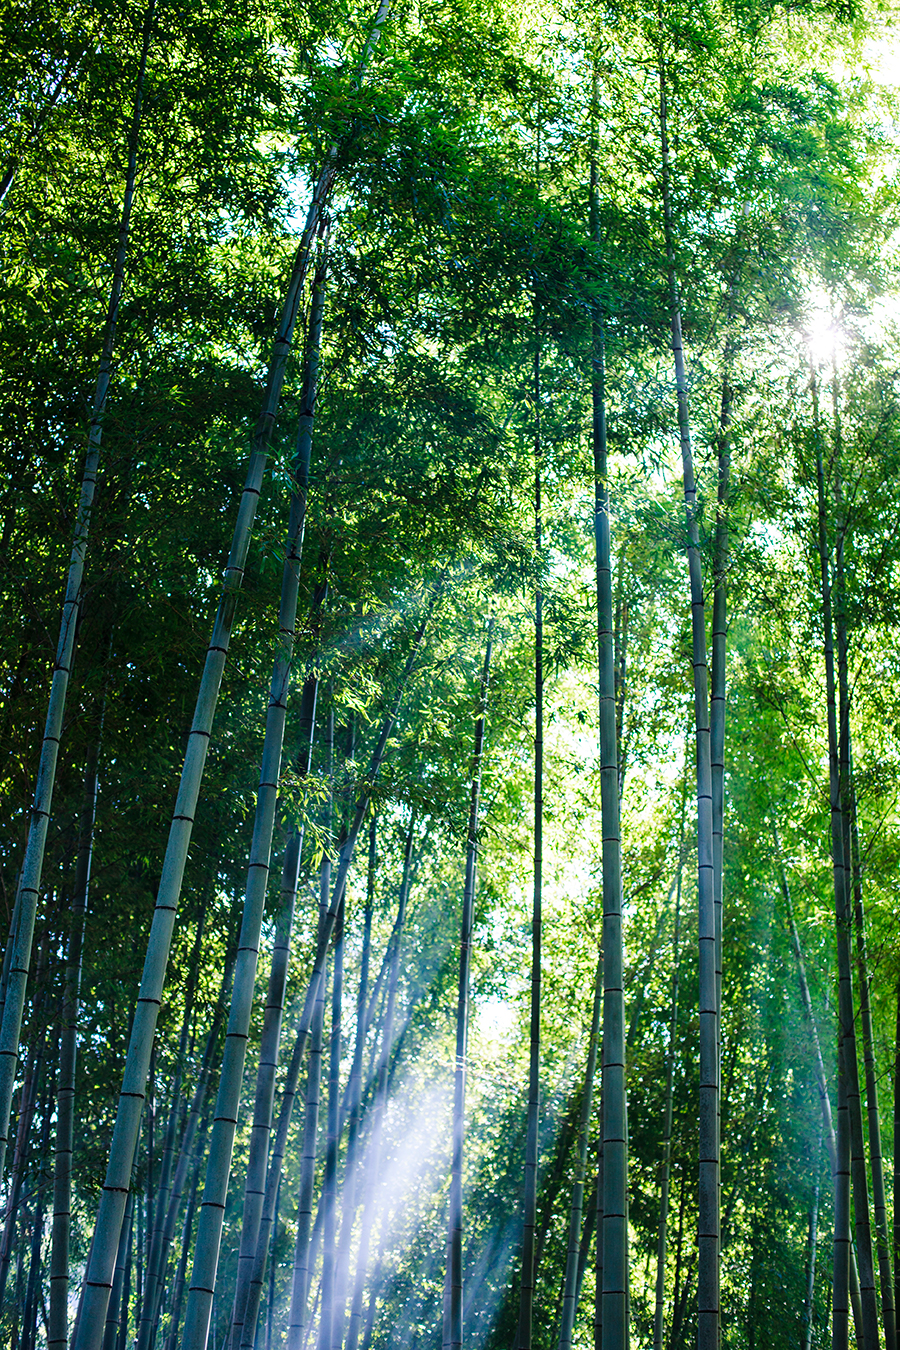 Sunlight filtering in the bamboo forest at Fushimi Inari in Kyoto, Japan.